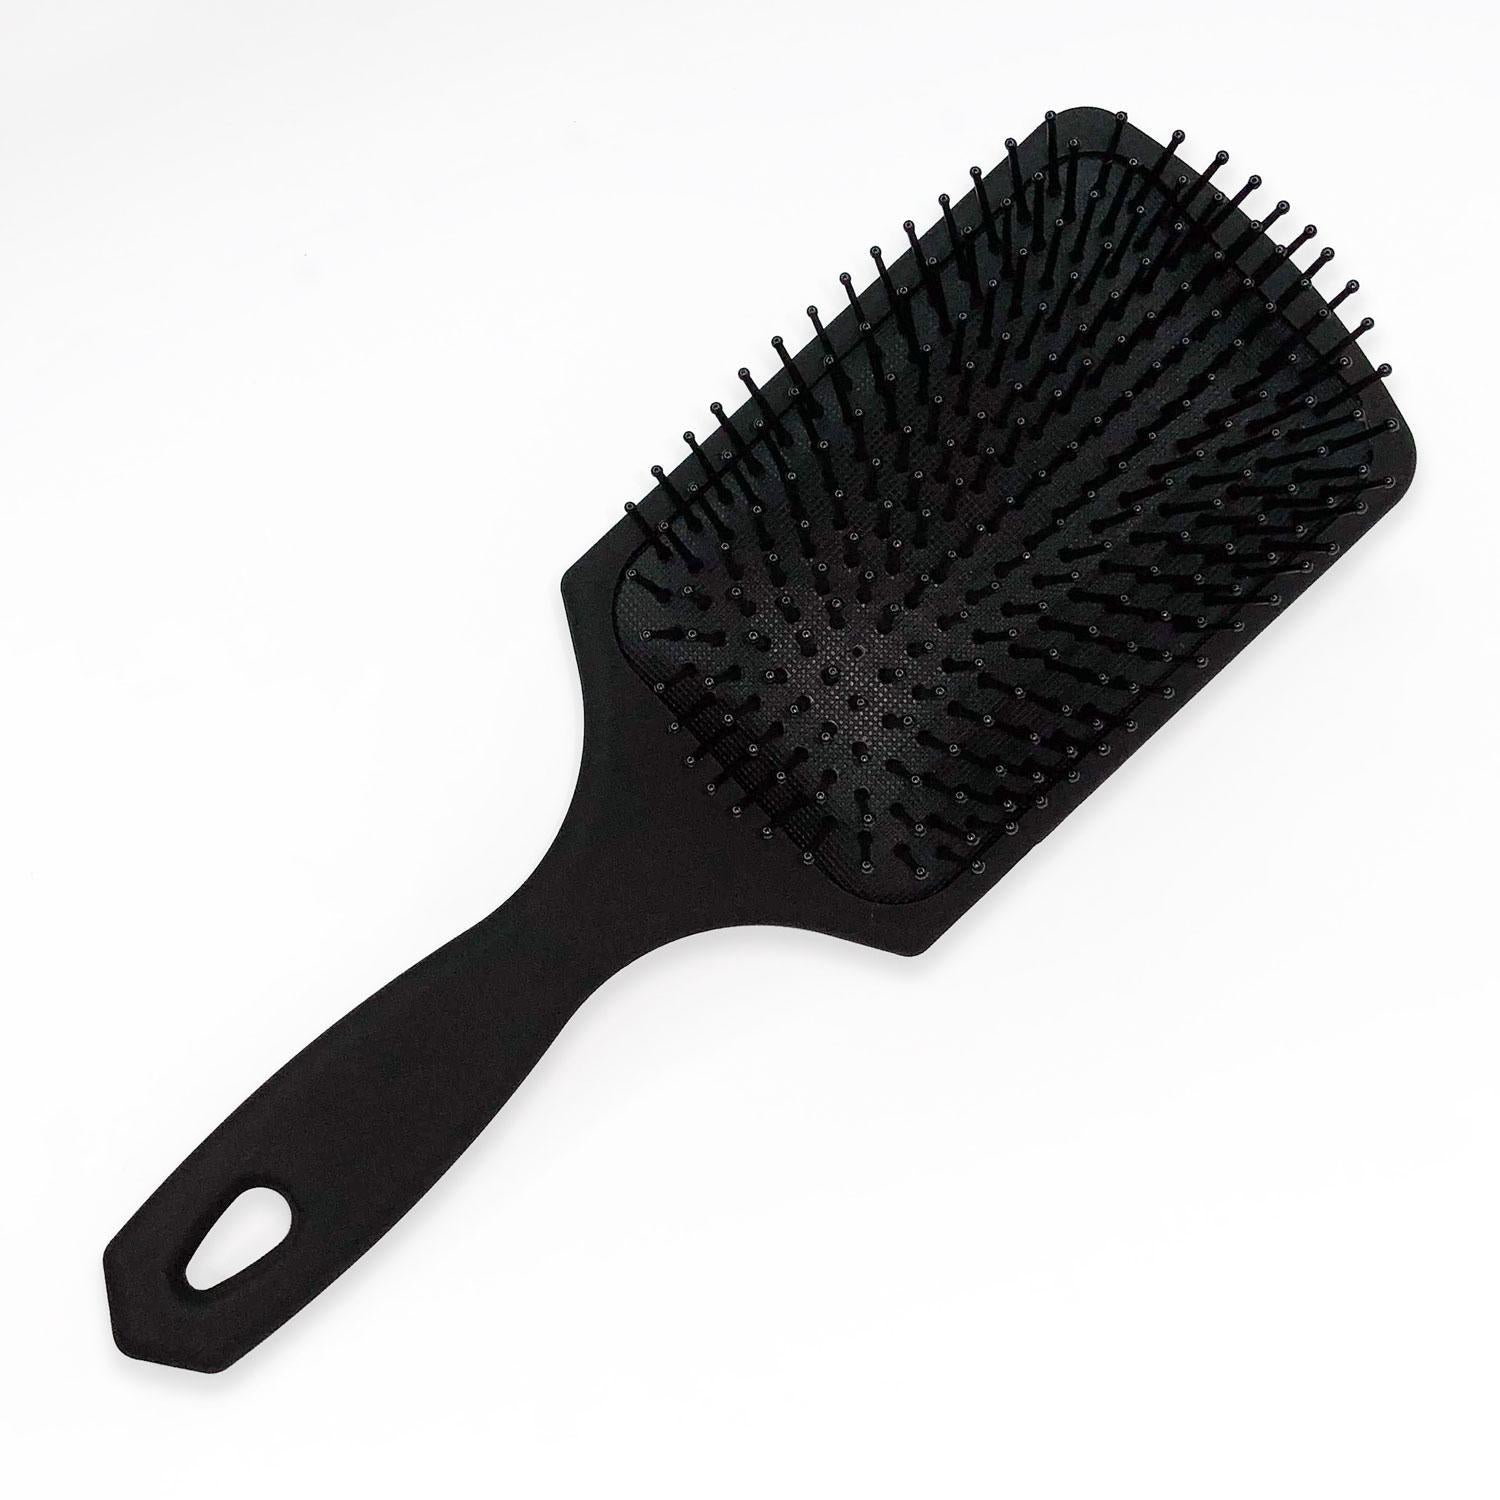 Laced Hair "Life is Short" Large Extension Safe Detangling Brush